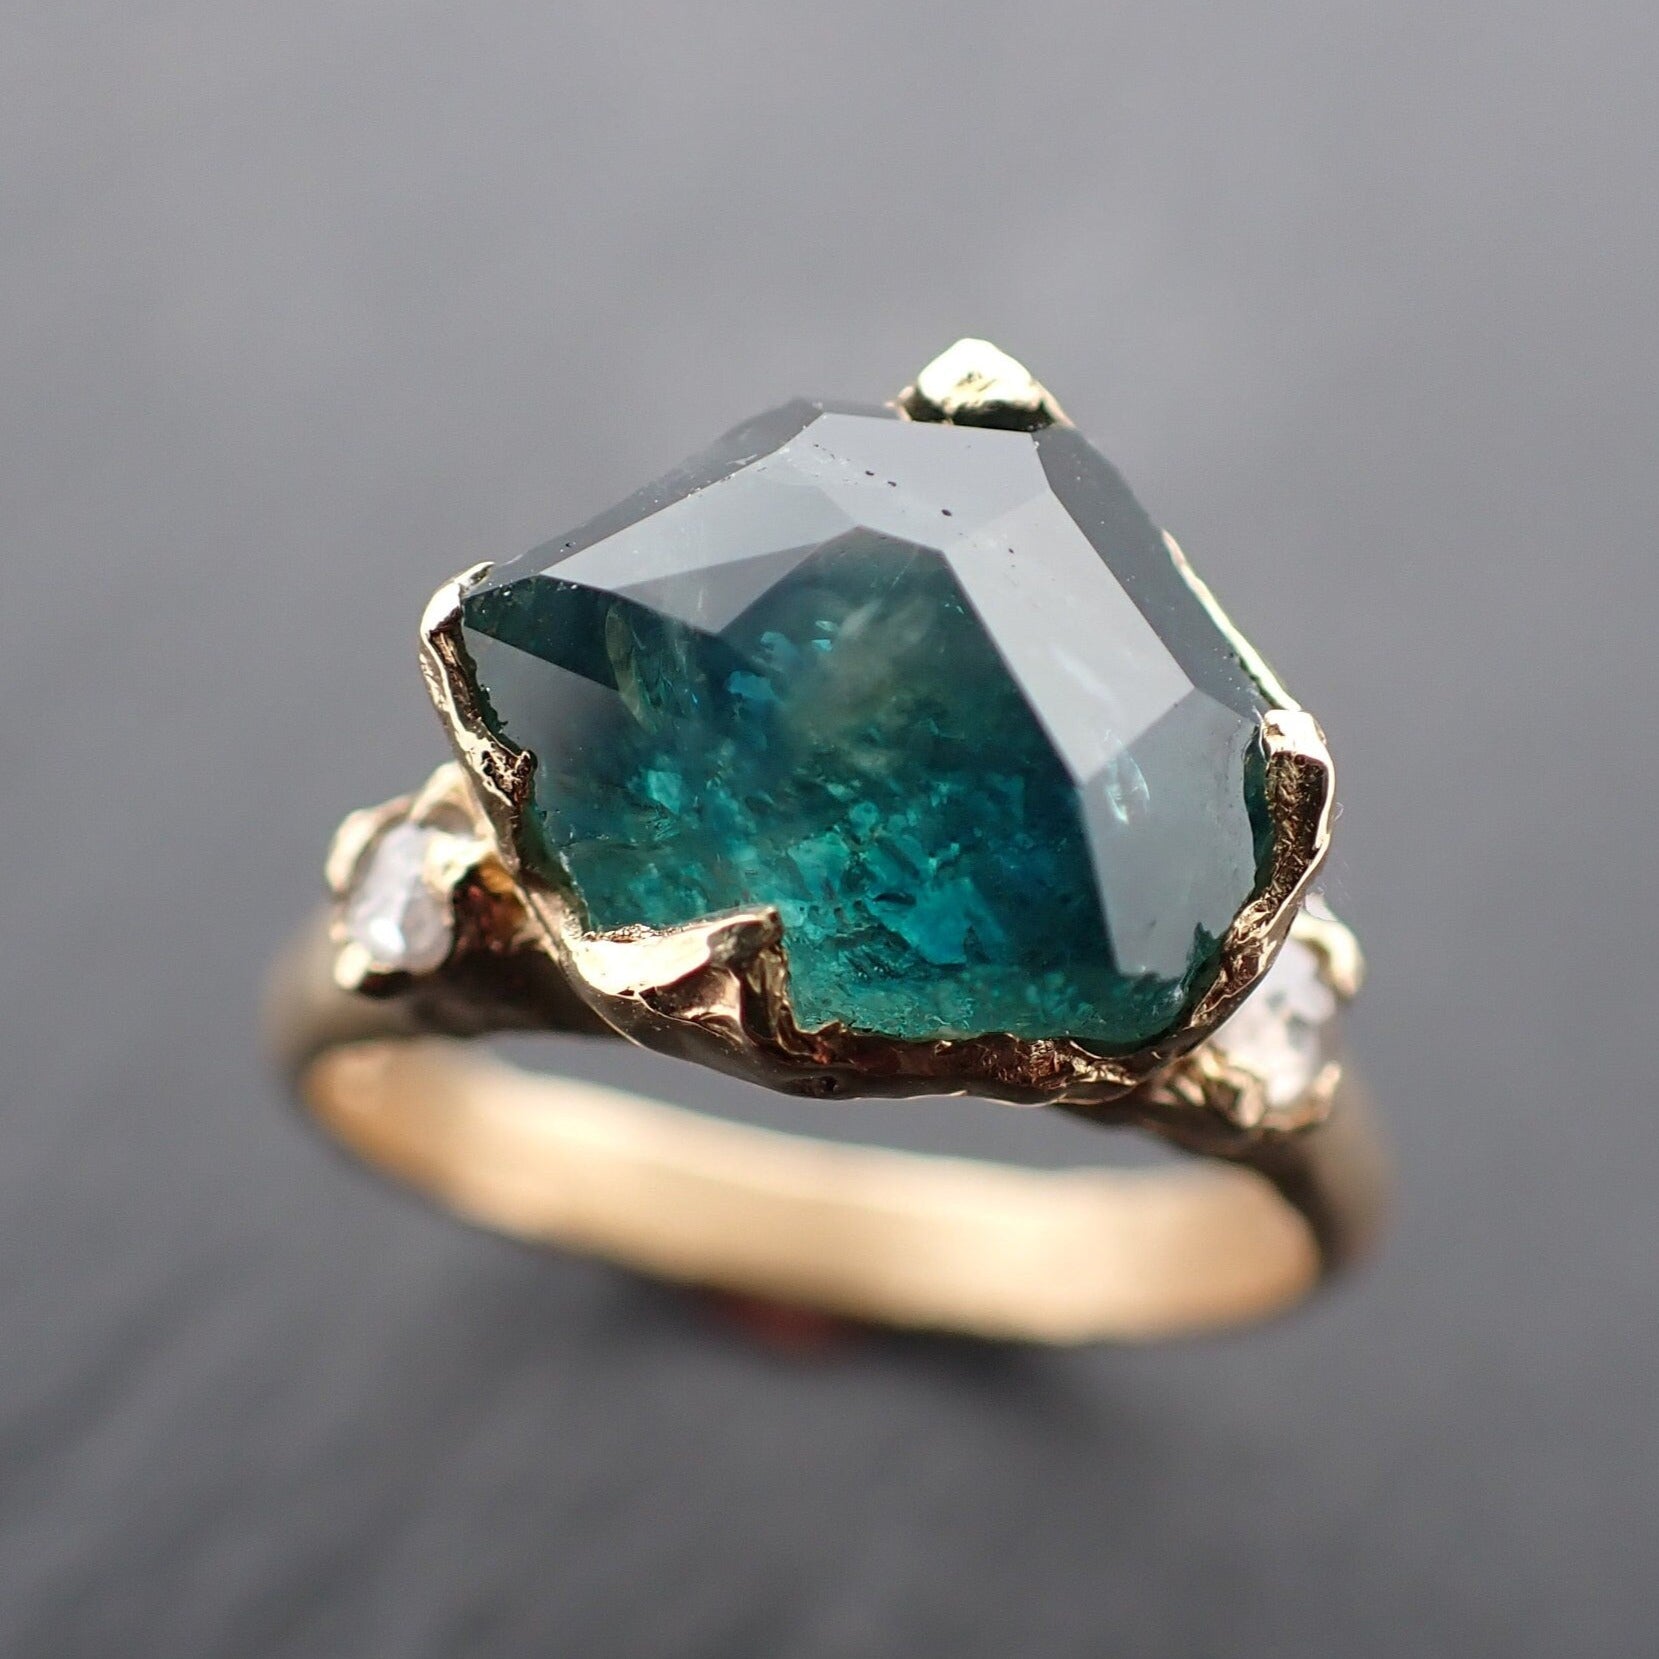 Partially faceted blue green Montana Sapphire salt and pepper Diamond 18k Yellow Gold Engagement Wedding Gemstone Multi stone Ring 3474